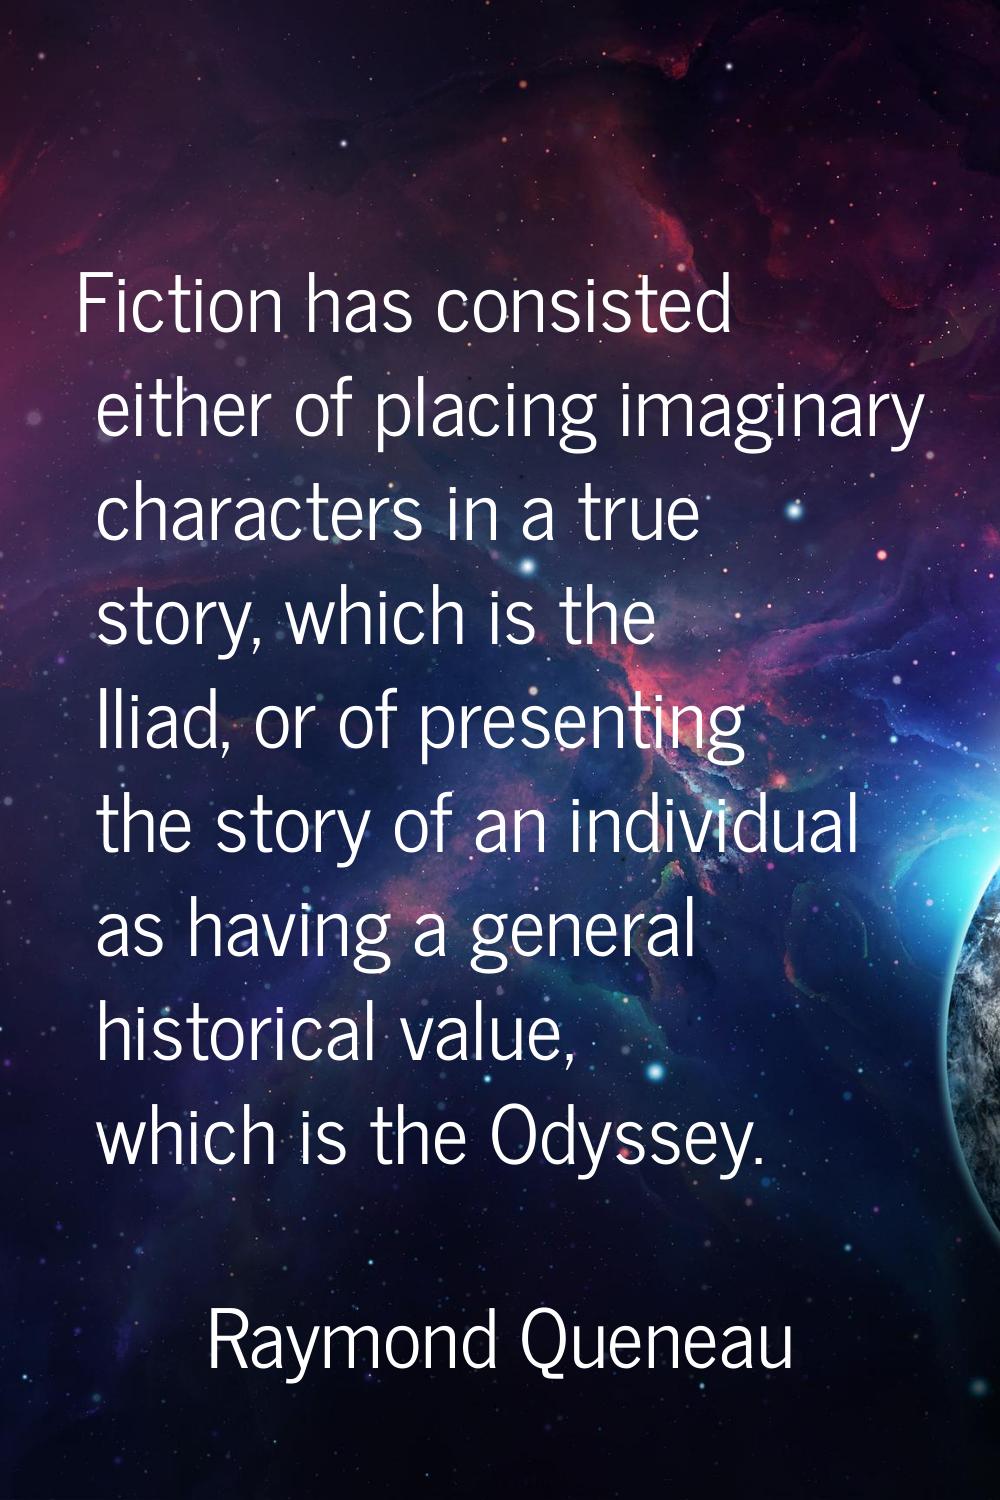 Fiction has consisted either of placing imaginary characters in a true story, which is the Iliad, o